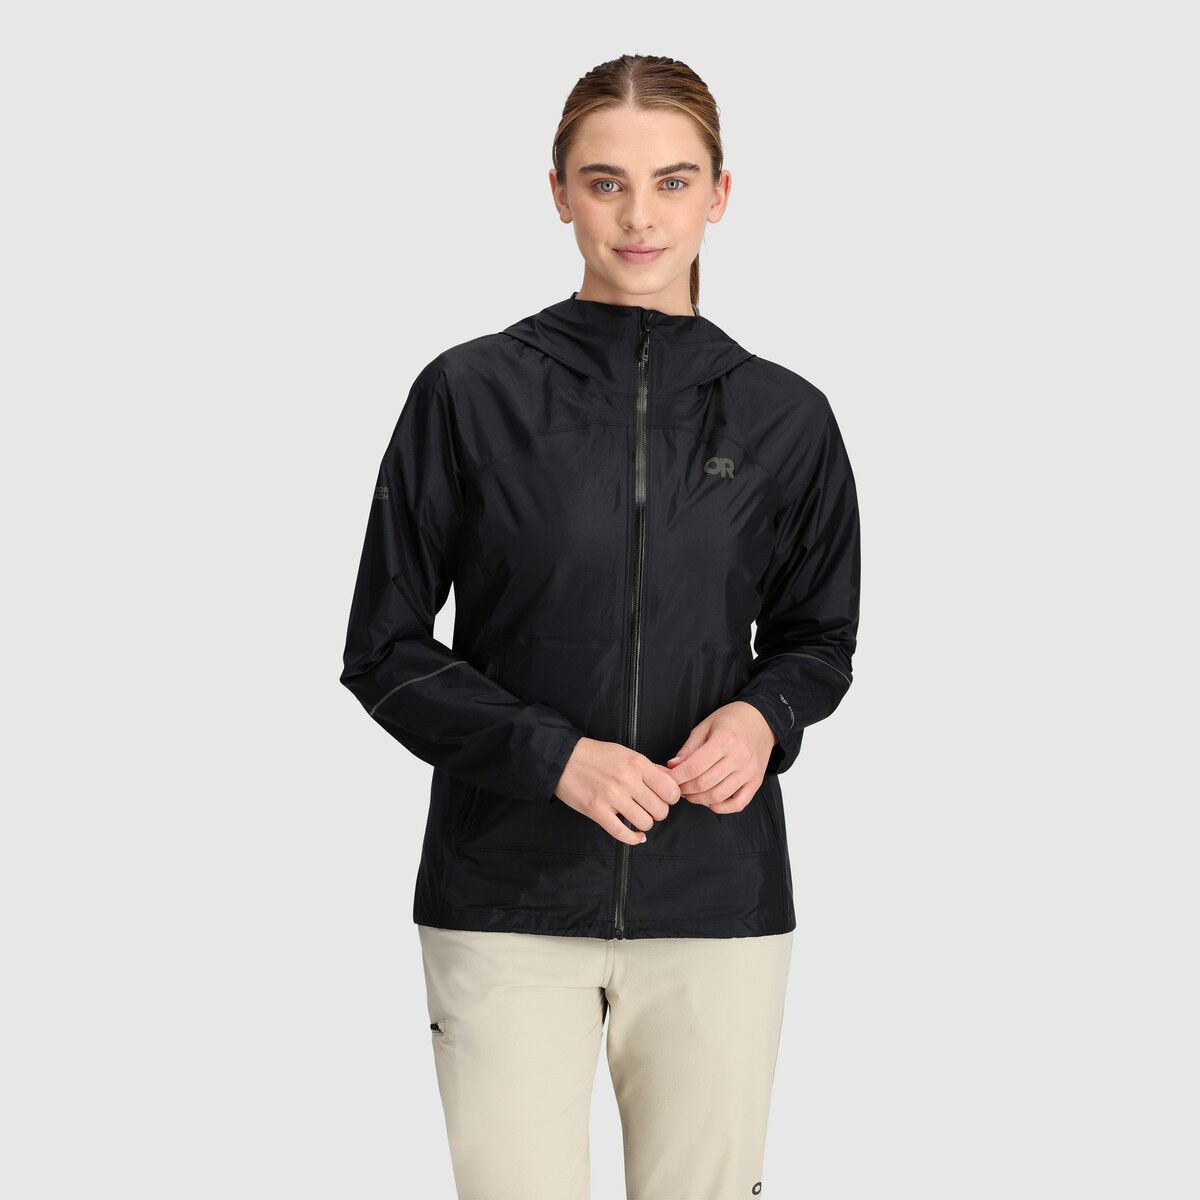 Outdoor Research Helium Rain Jacket - Chaqueta impermeable - Mujer | Hardloop